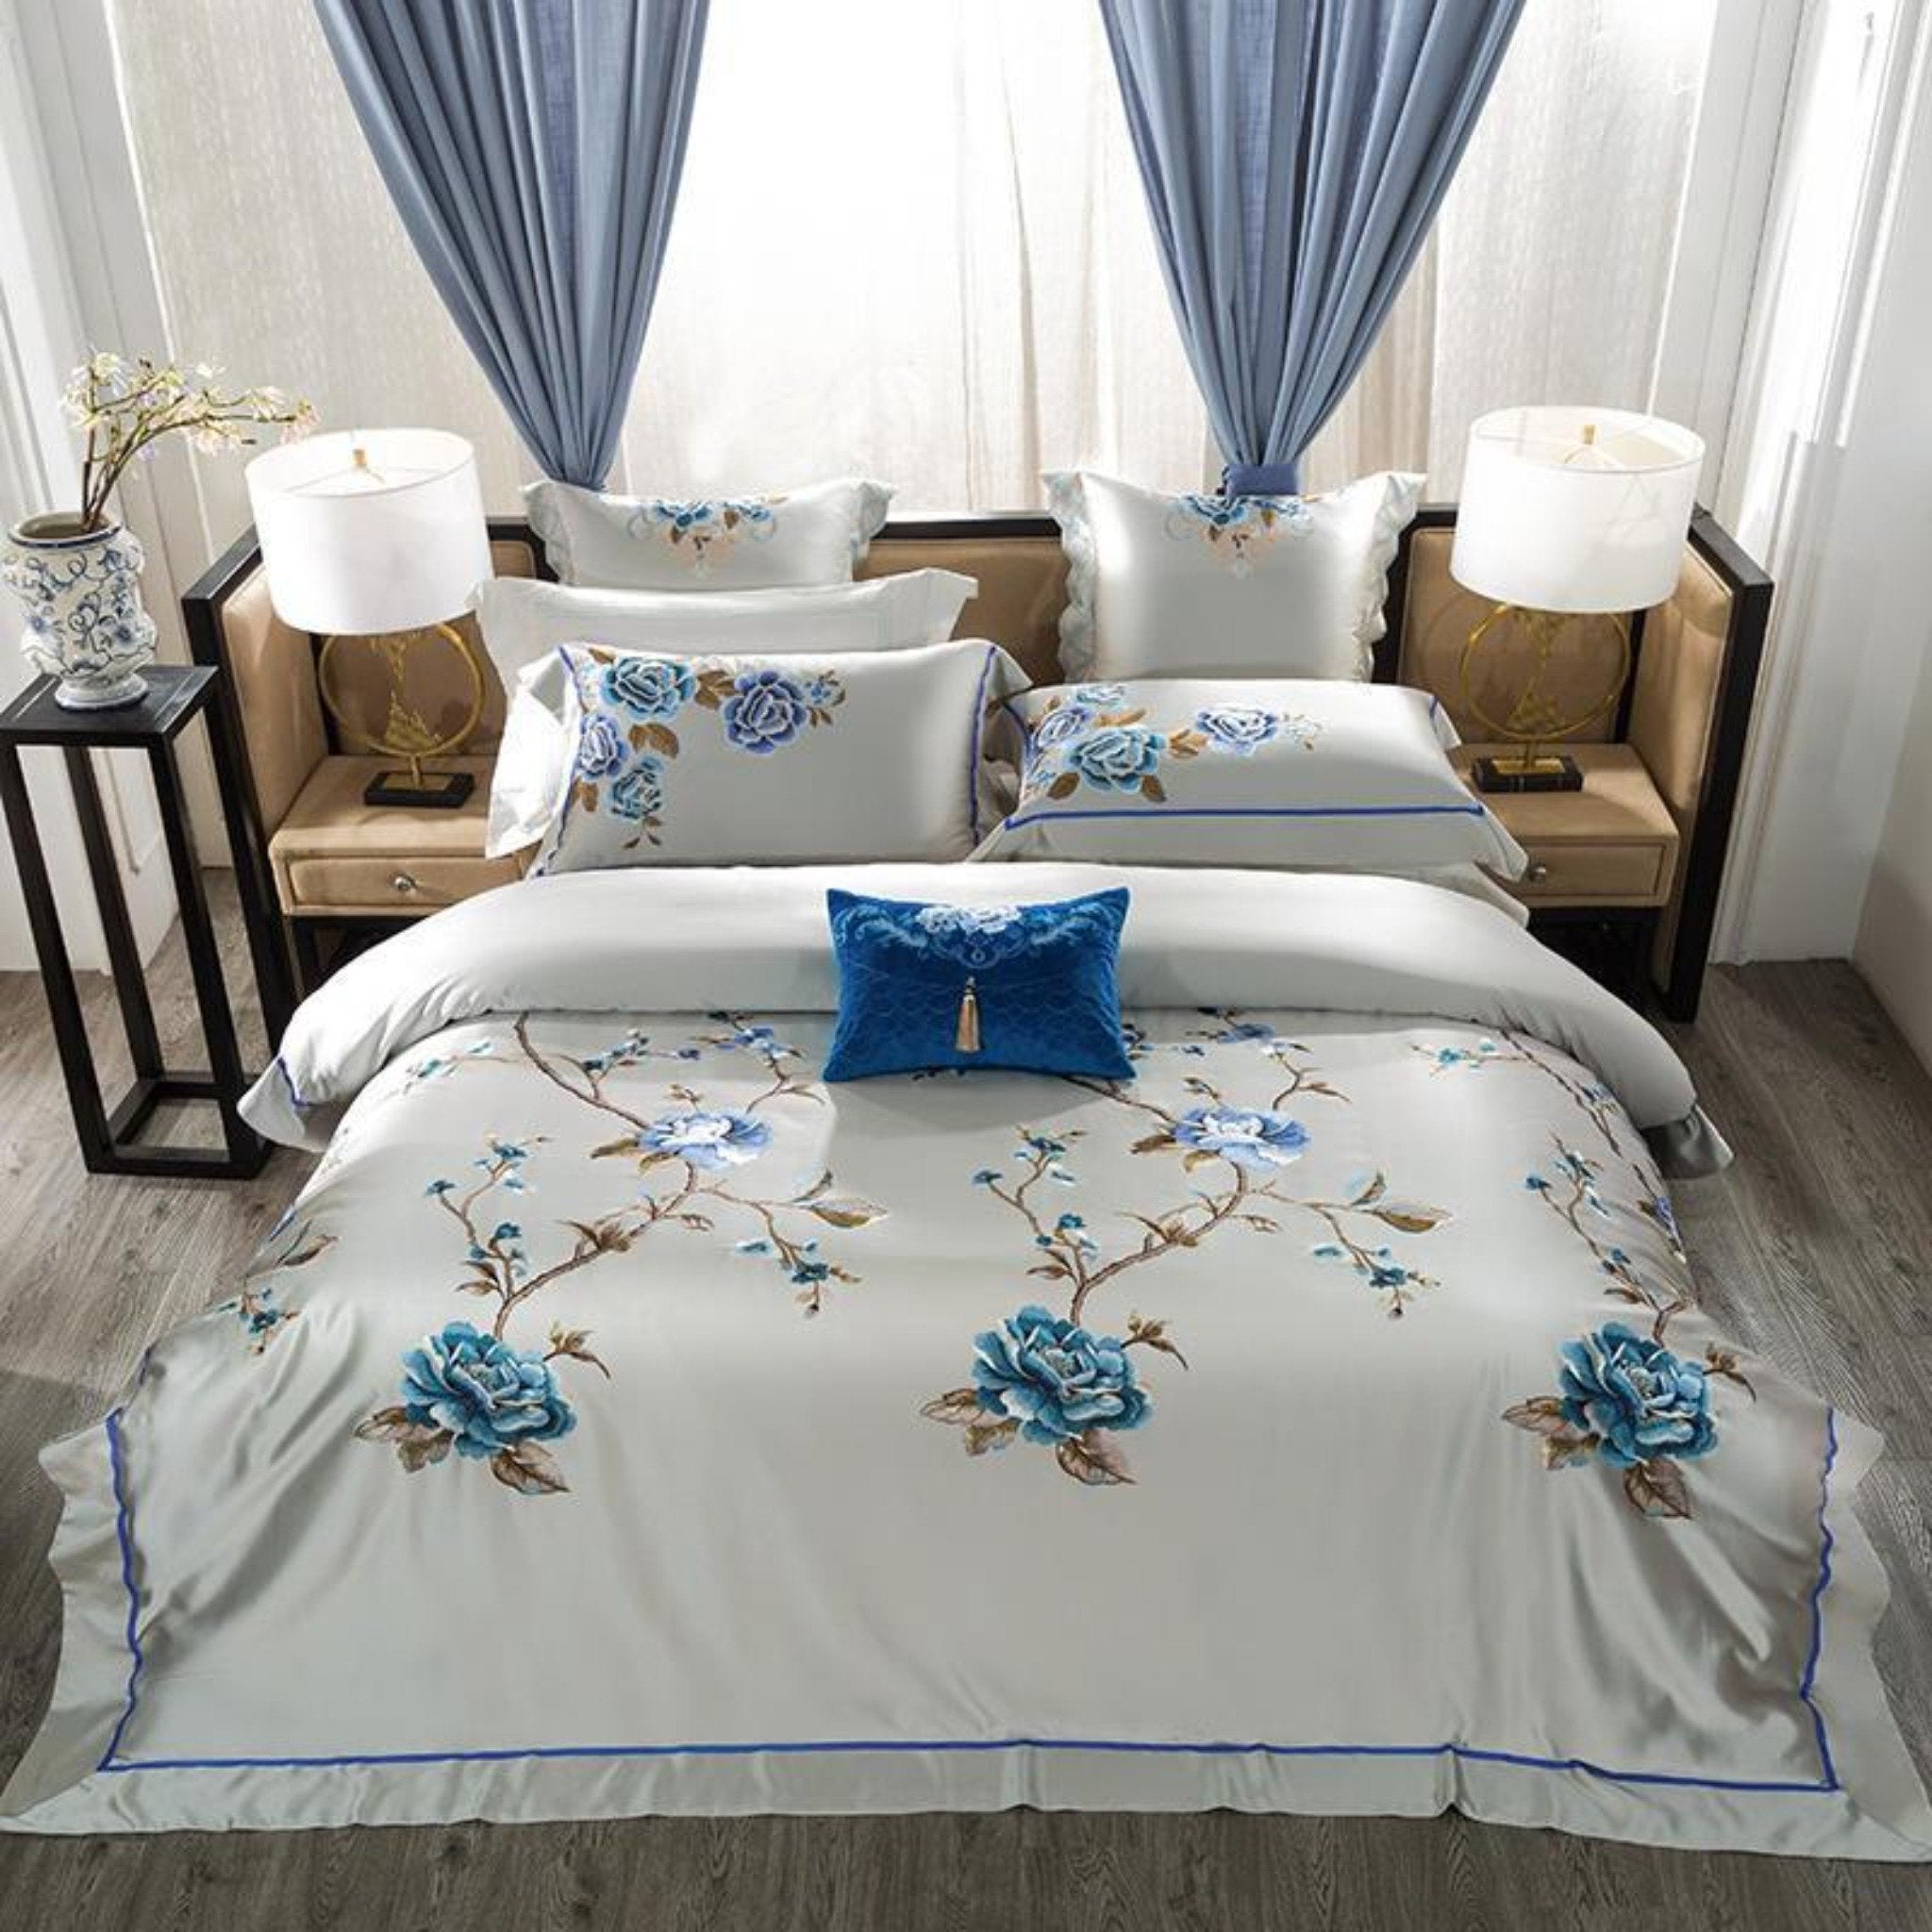 Lowest prices bedding sets queen & king here! next day delivery on luxury bedding sets. Never overspend on exquisite bedding sets again. Shop now.